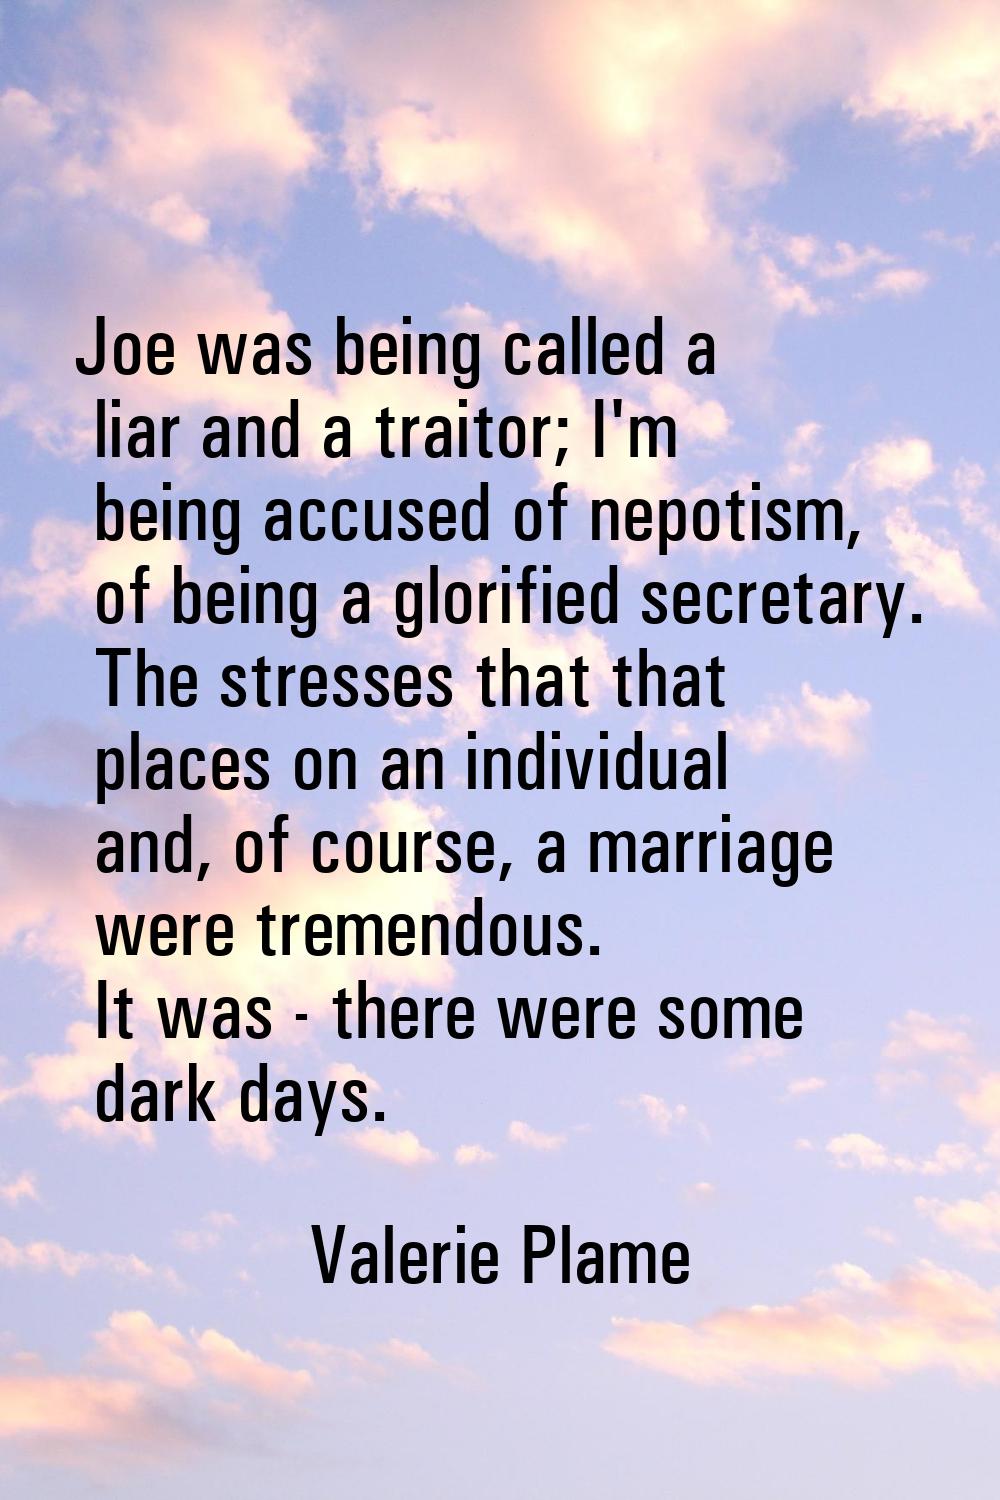 Joe was being called a liar and a traitor; I'm being accused of nepotism, of being a glorified secr